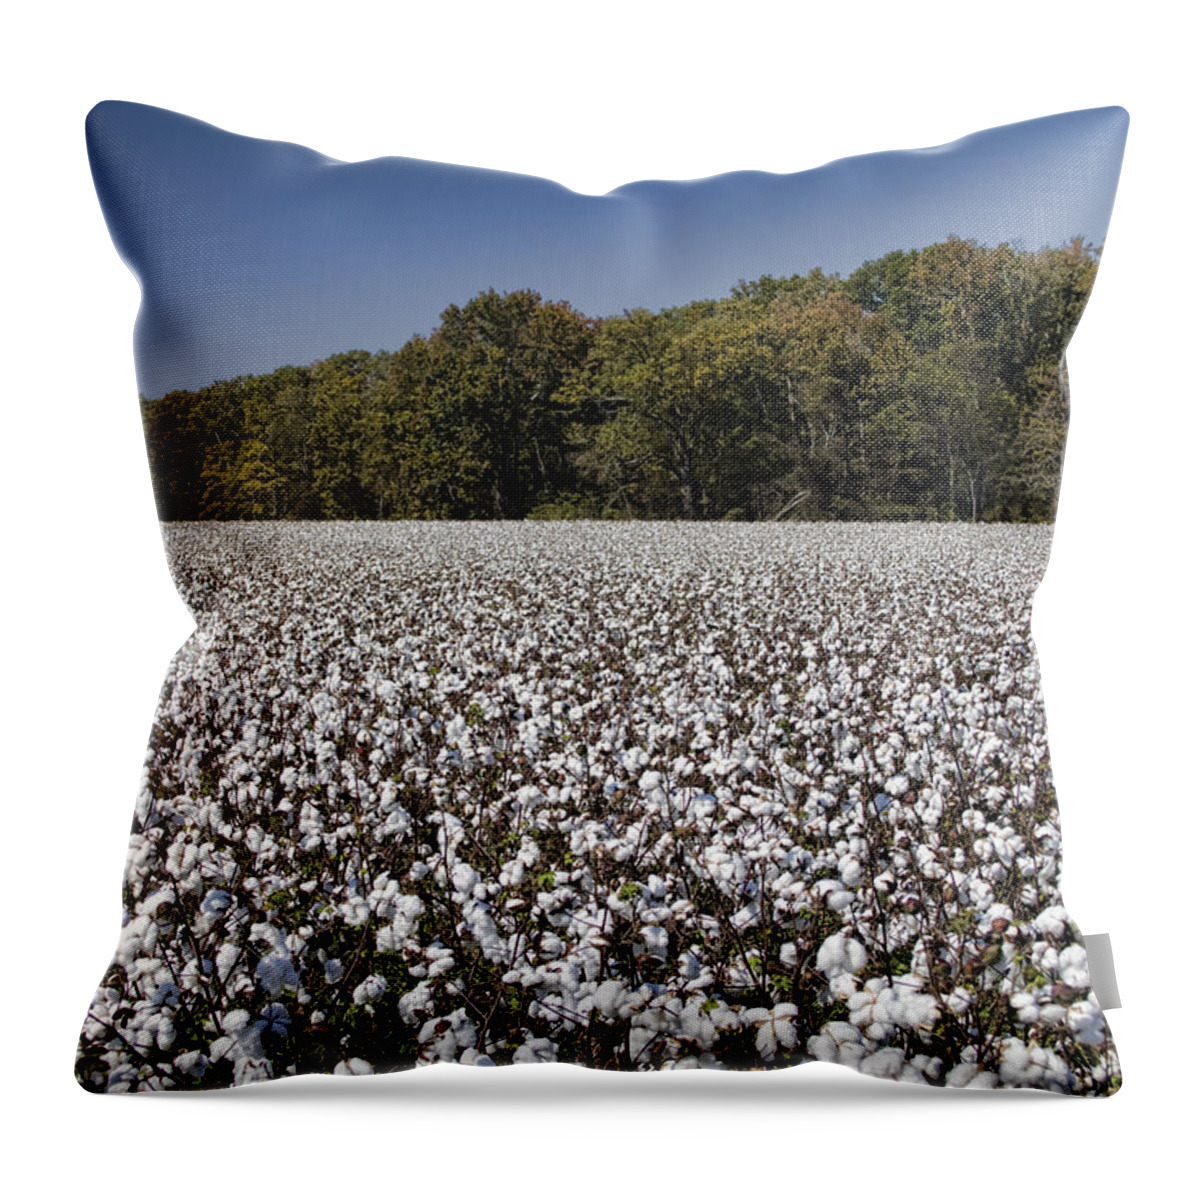 Cotton Throw Pillow featuring the photograph Limestone County Alabama Cotton Crop by Kathy Clark